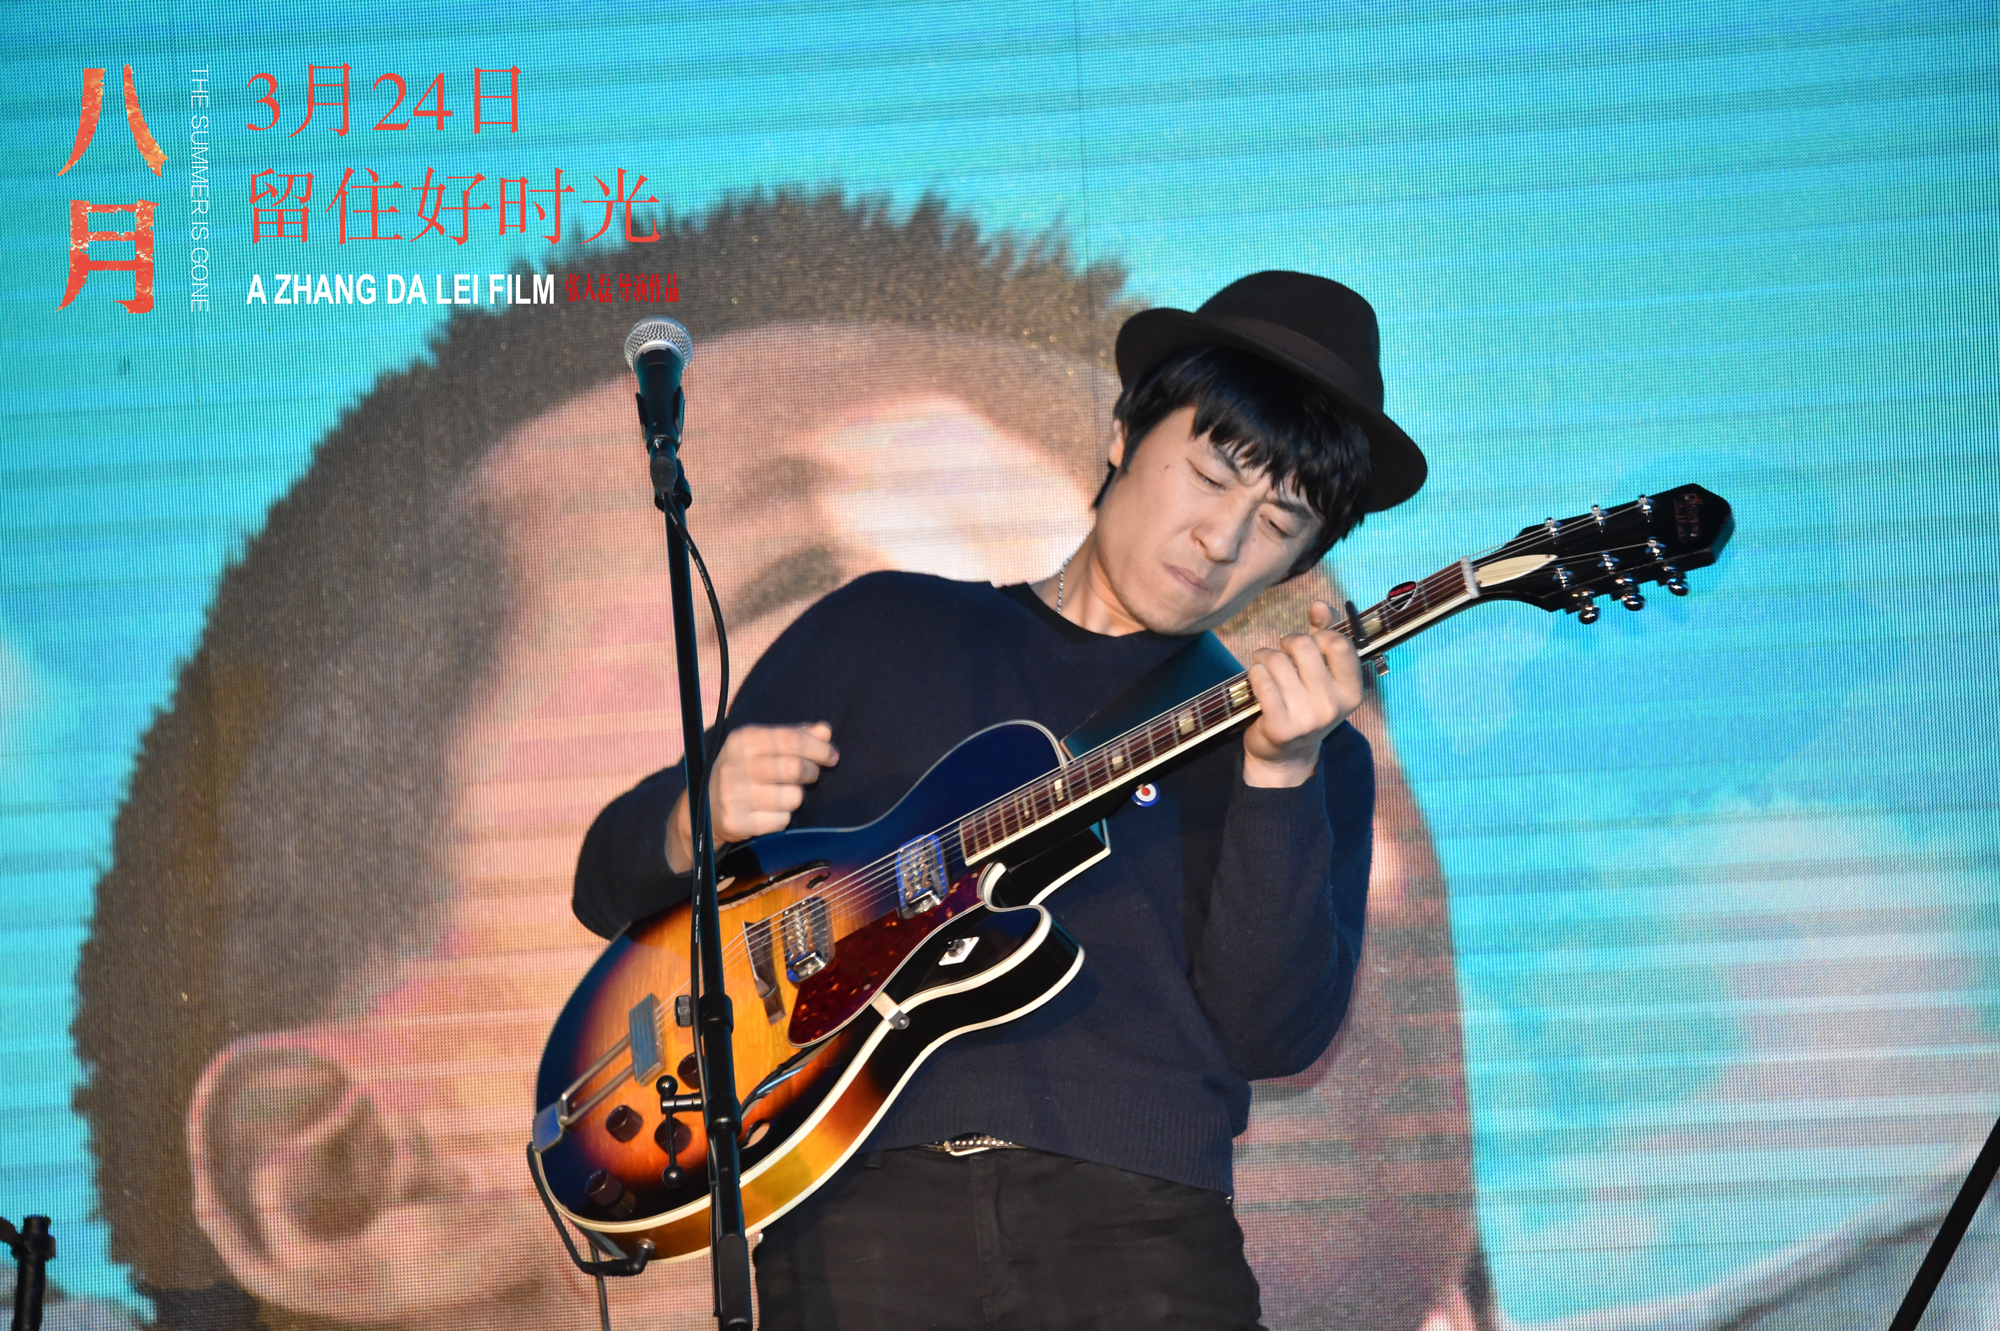 Director Zhang Dalei plays guitar at an event celebrating the launch of his debut film 'The Summer is Gone'. The film started playing in cinemas across the Chinese mainland on March 24, 2017.[Photo provided to China Plus]